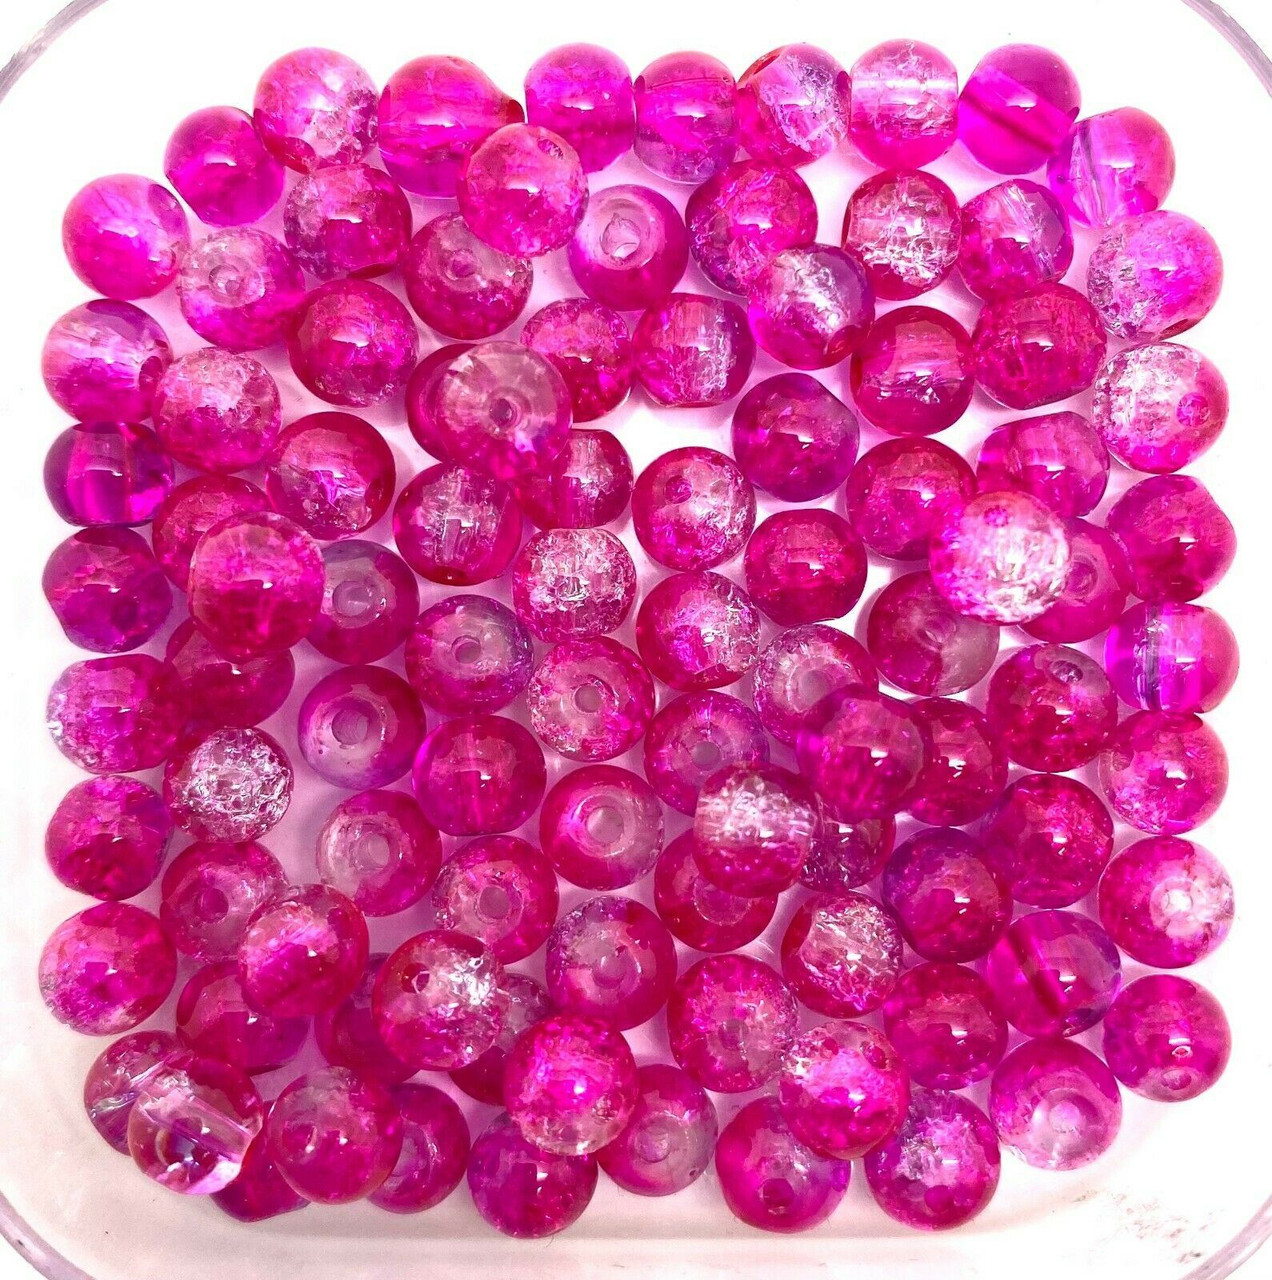 8mm Crackle Glass Beads - Hot Pink & Clear, 50 beads